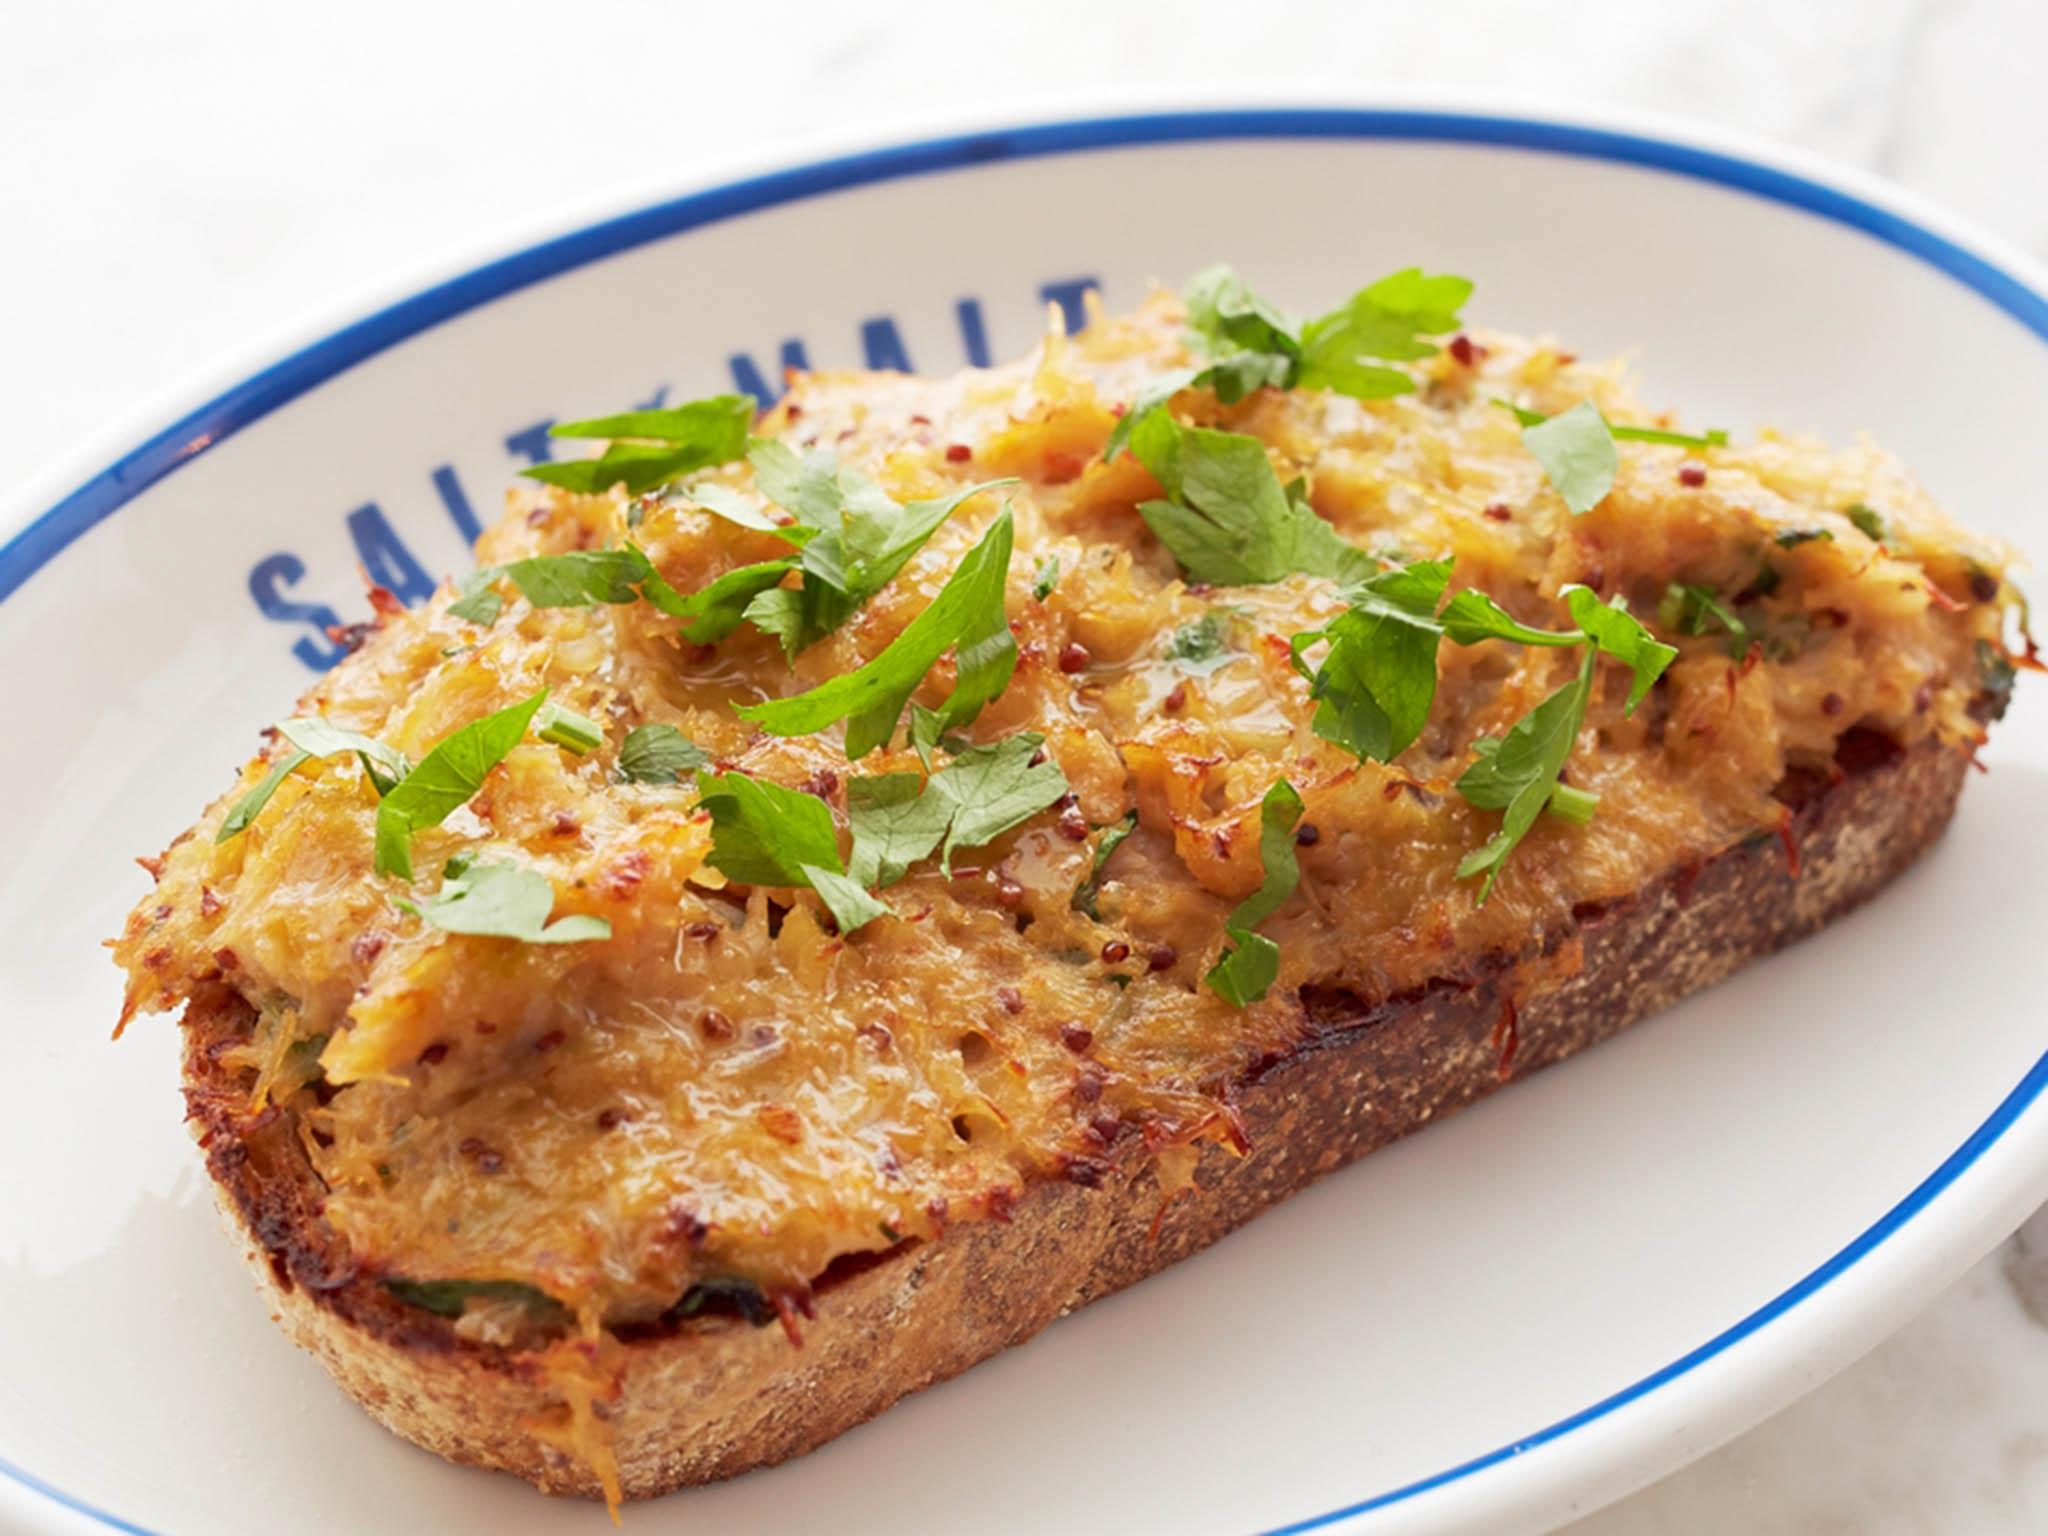 Mix crab meat with cider with cheese and slather it on toast